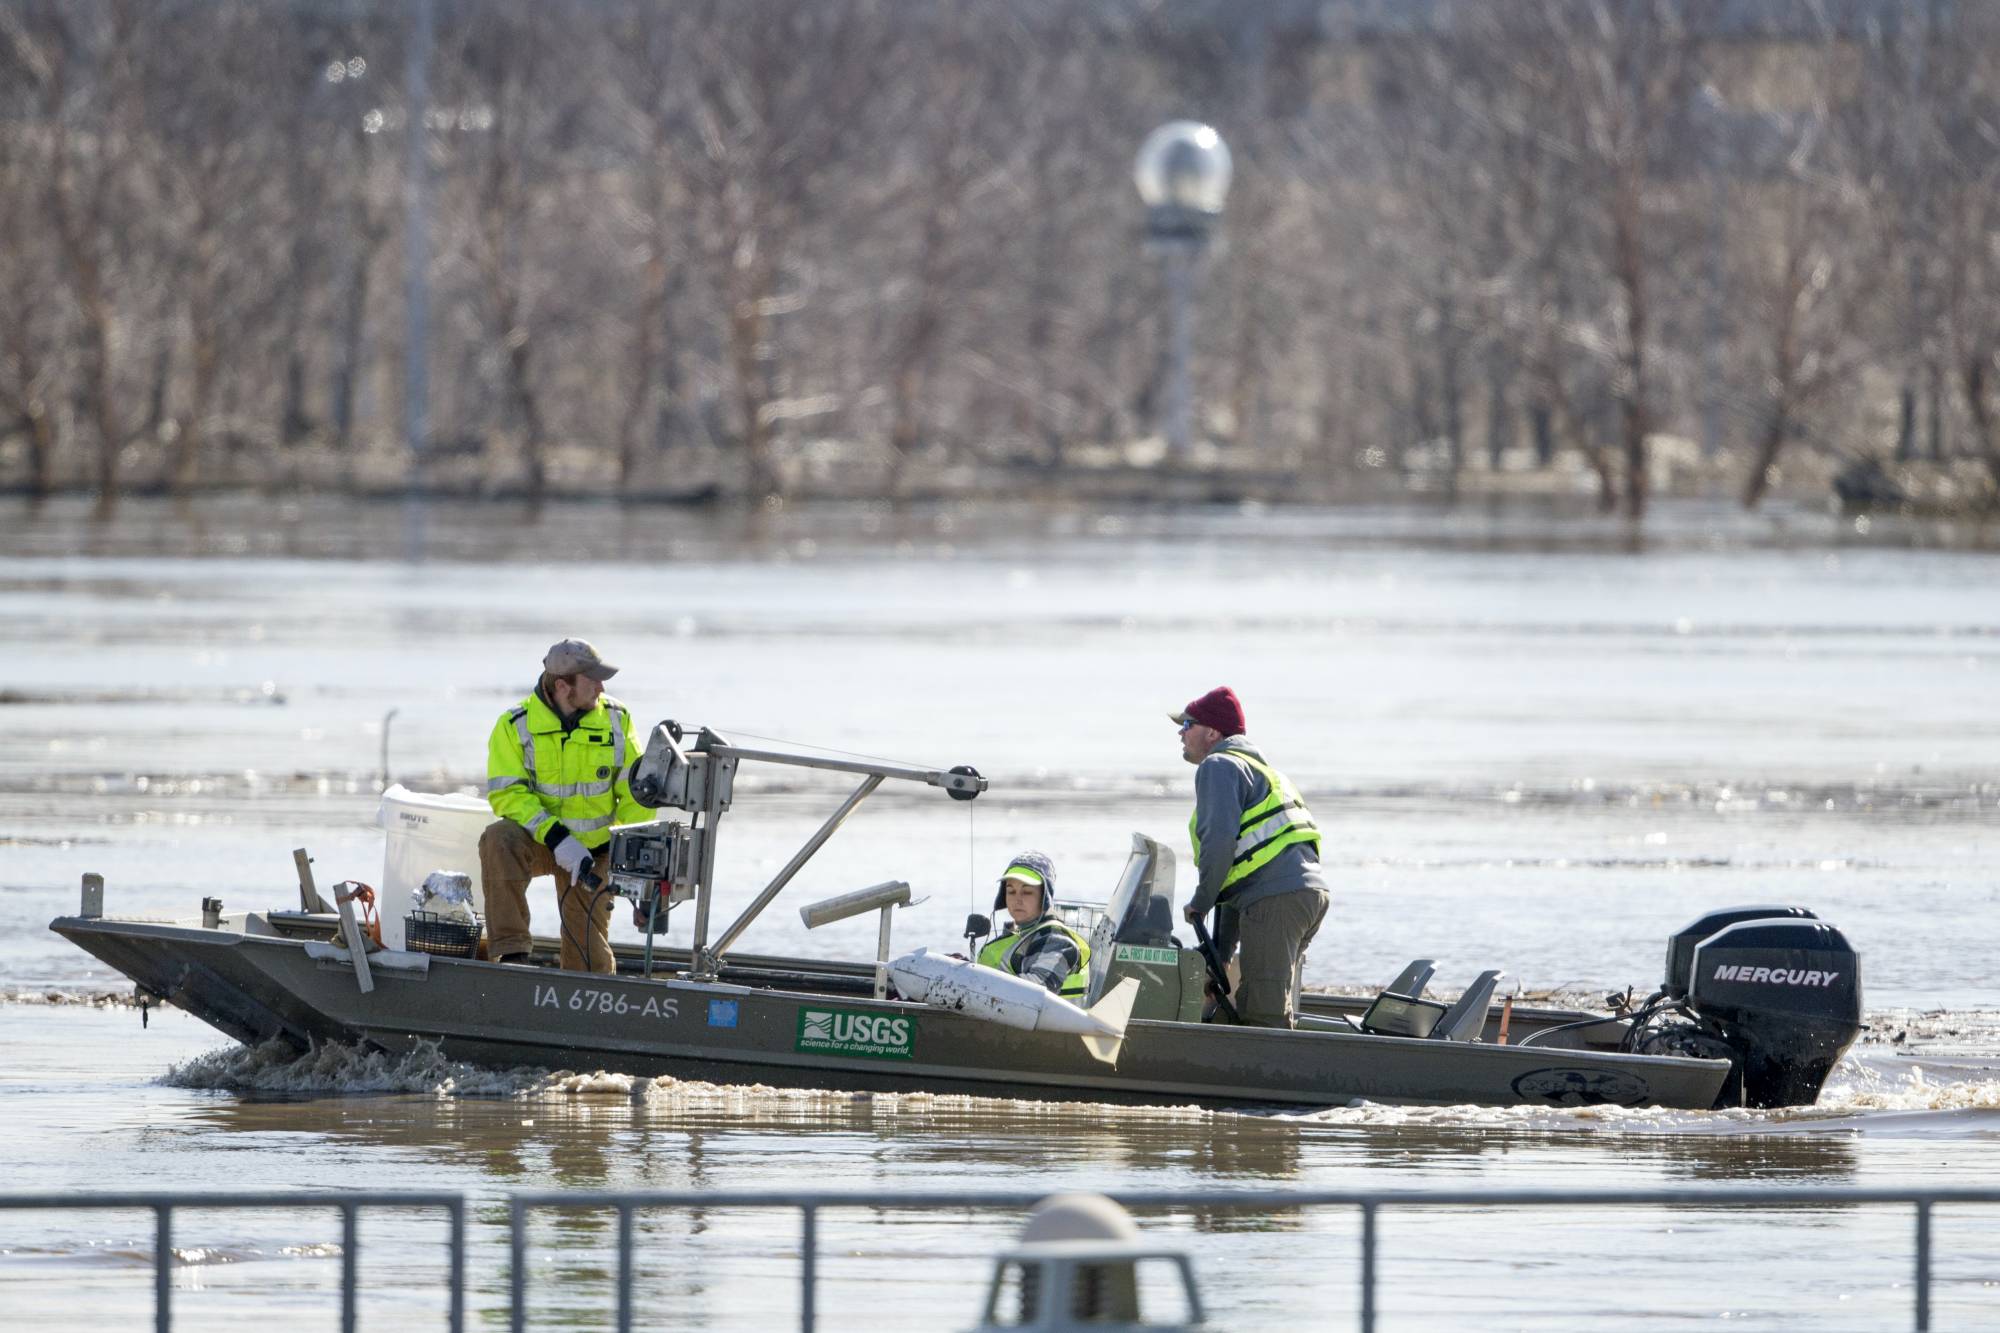 FILE- In this March 16, 2019 file photo, surveyors with the USGS take measurements of the Missouri River in Omaha, Neb., as the river overflows its banks. Nebraska, Iowa, Kansas and Missouri are joining forces for a study that will look for ways the states can limit flooding along the Missouri River and give them information about how wetter weather patterns could require changes to the federal government's management of the basin's reservoirs. The states are pooling their money to pay for half of a $400,000 study with the U.S. Army Corps of Engineers to measure how much water flows down the Missouri River. (AP Photo/Nati Harnik)